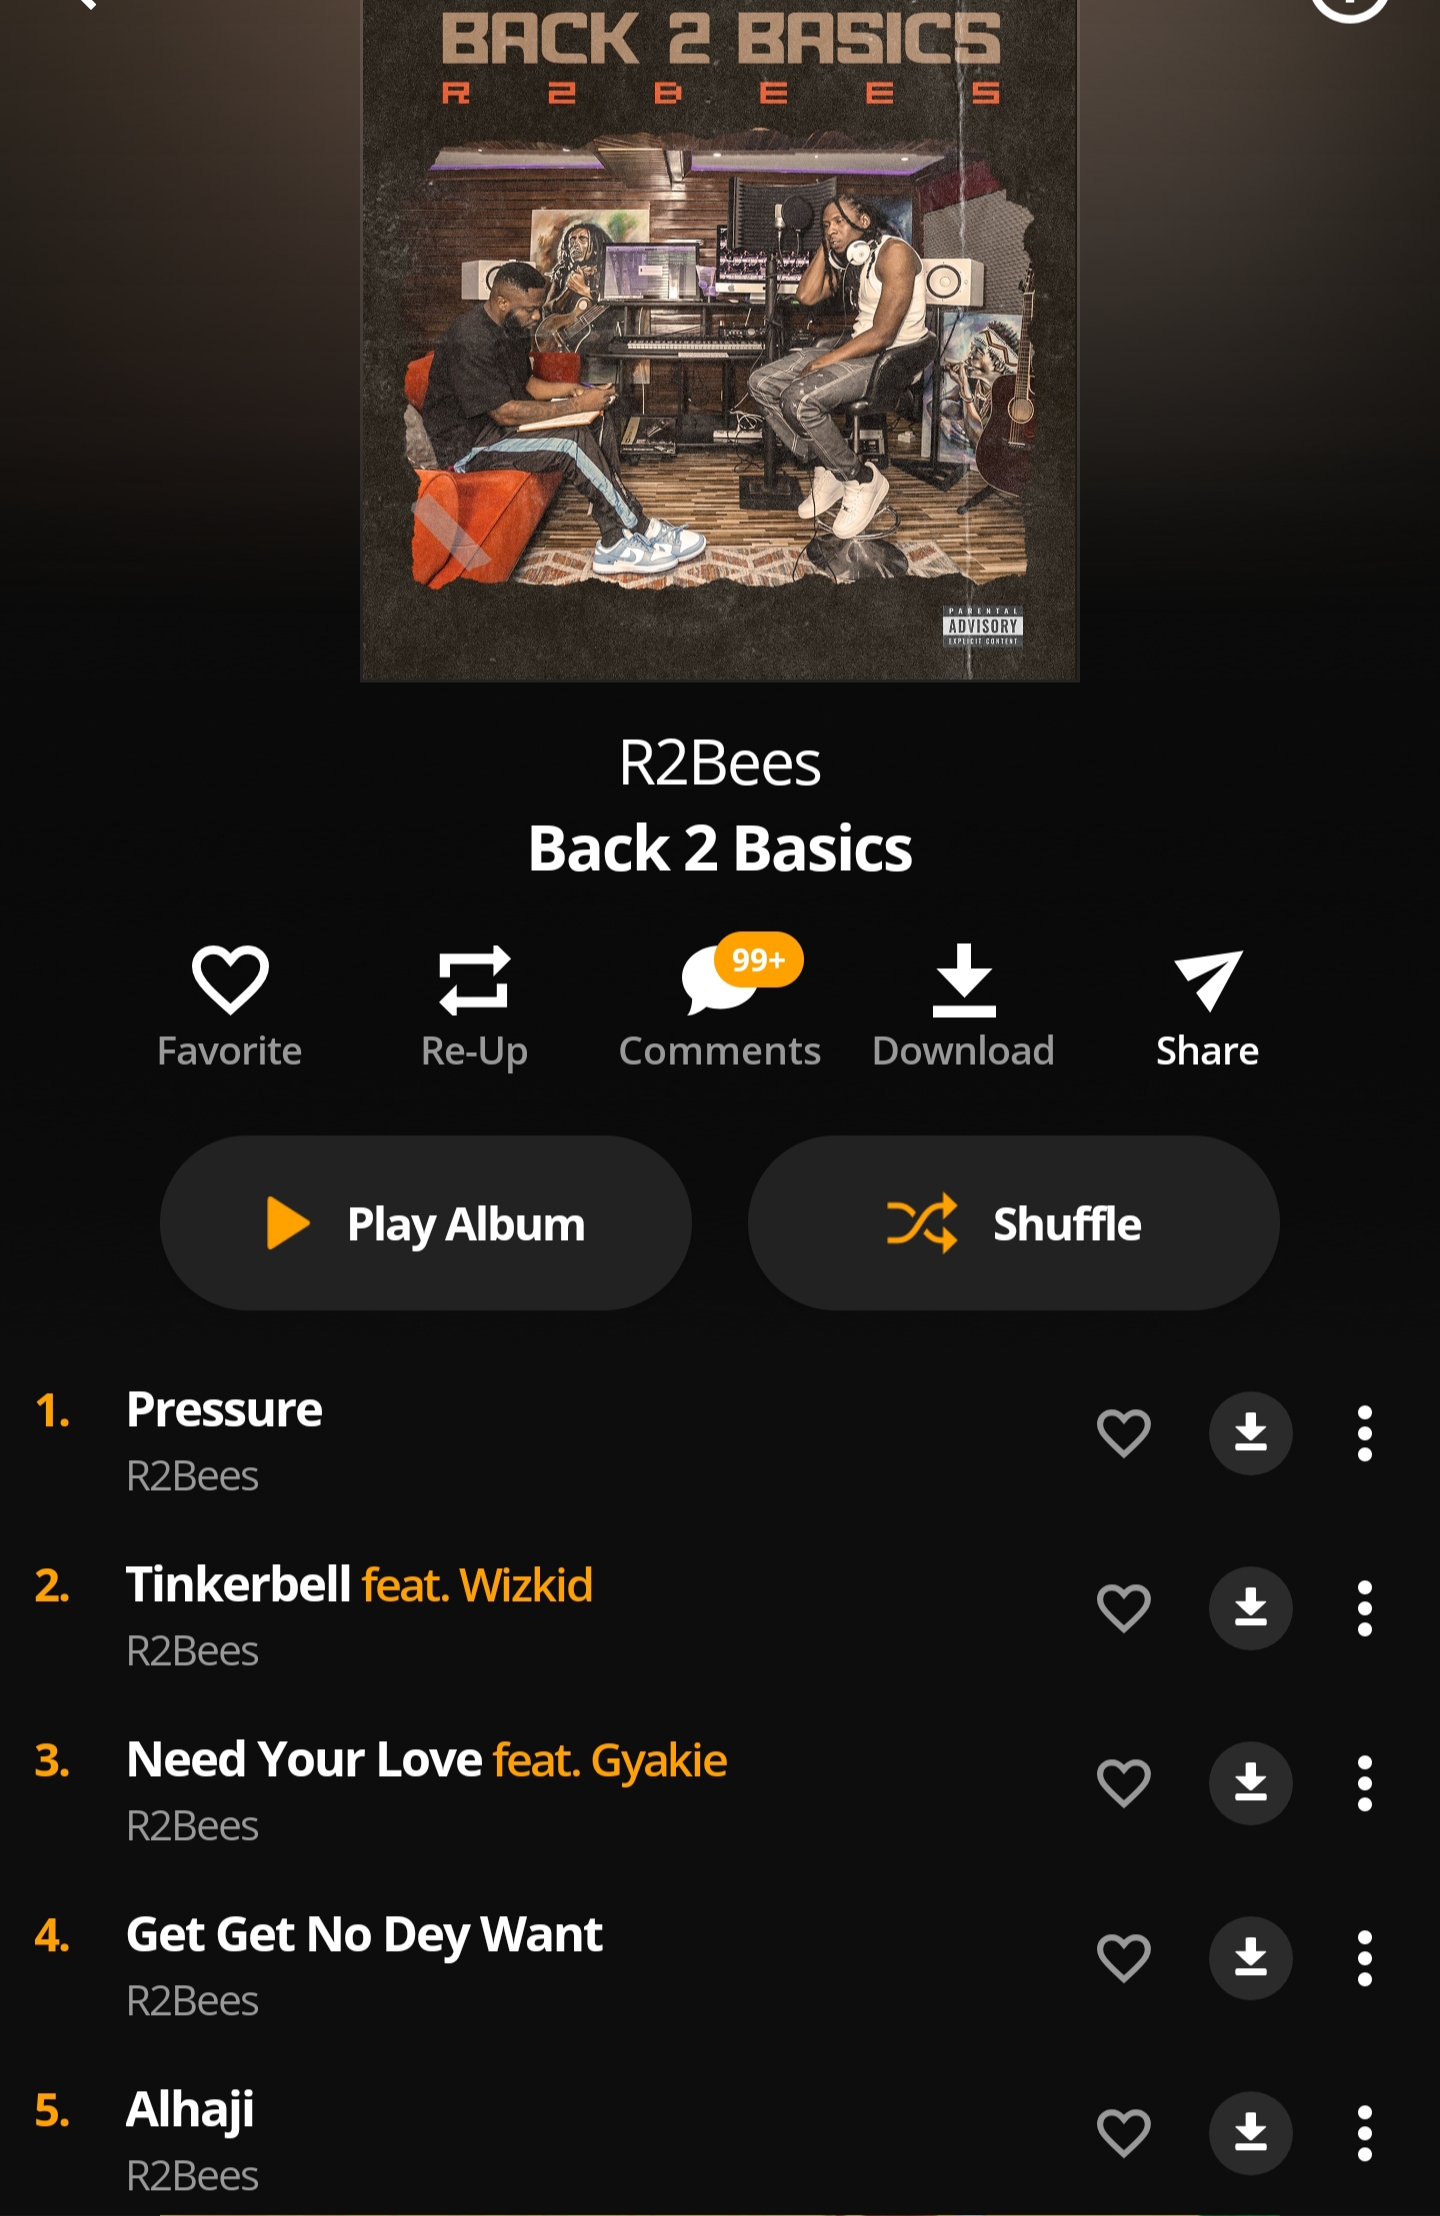 R2Bees Features Wizkid, Gyakie, Mr Eazi & King Promise In New Album “Back 2 Basics”